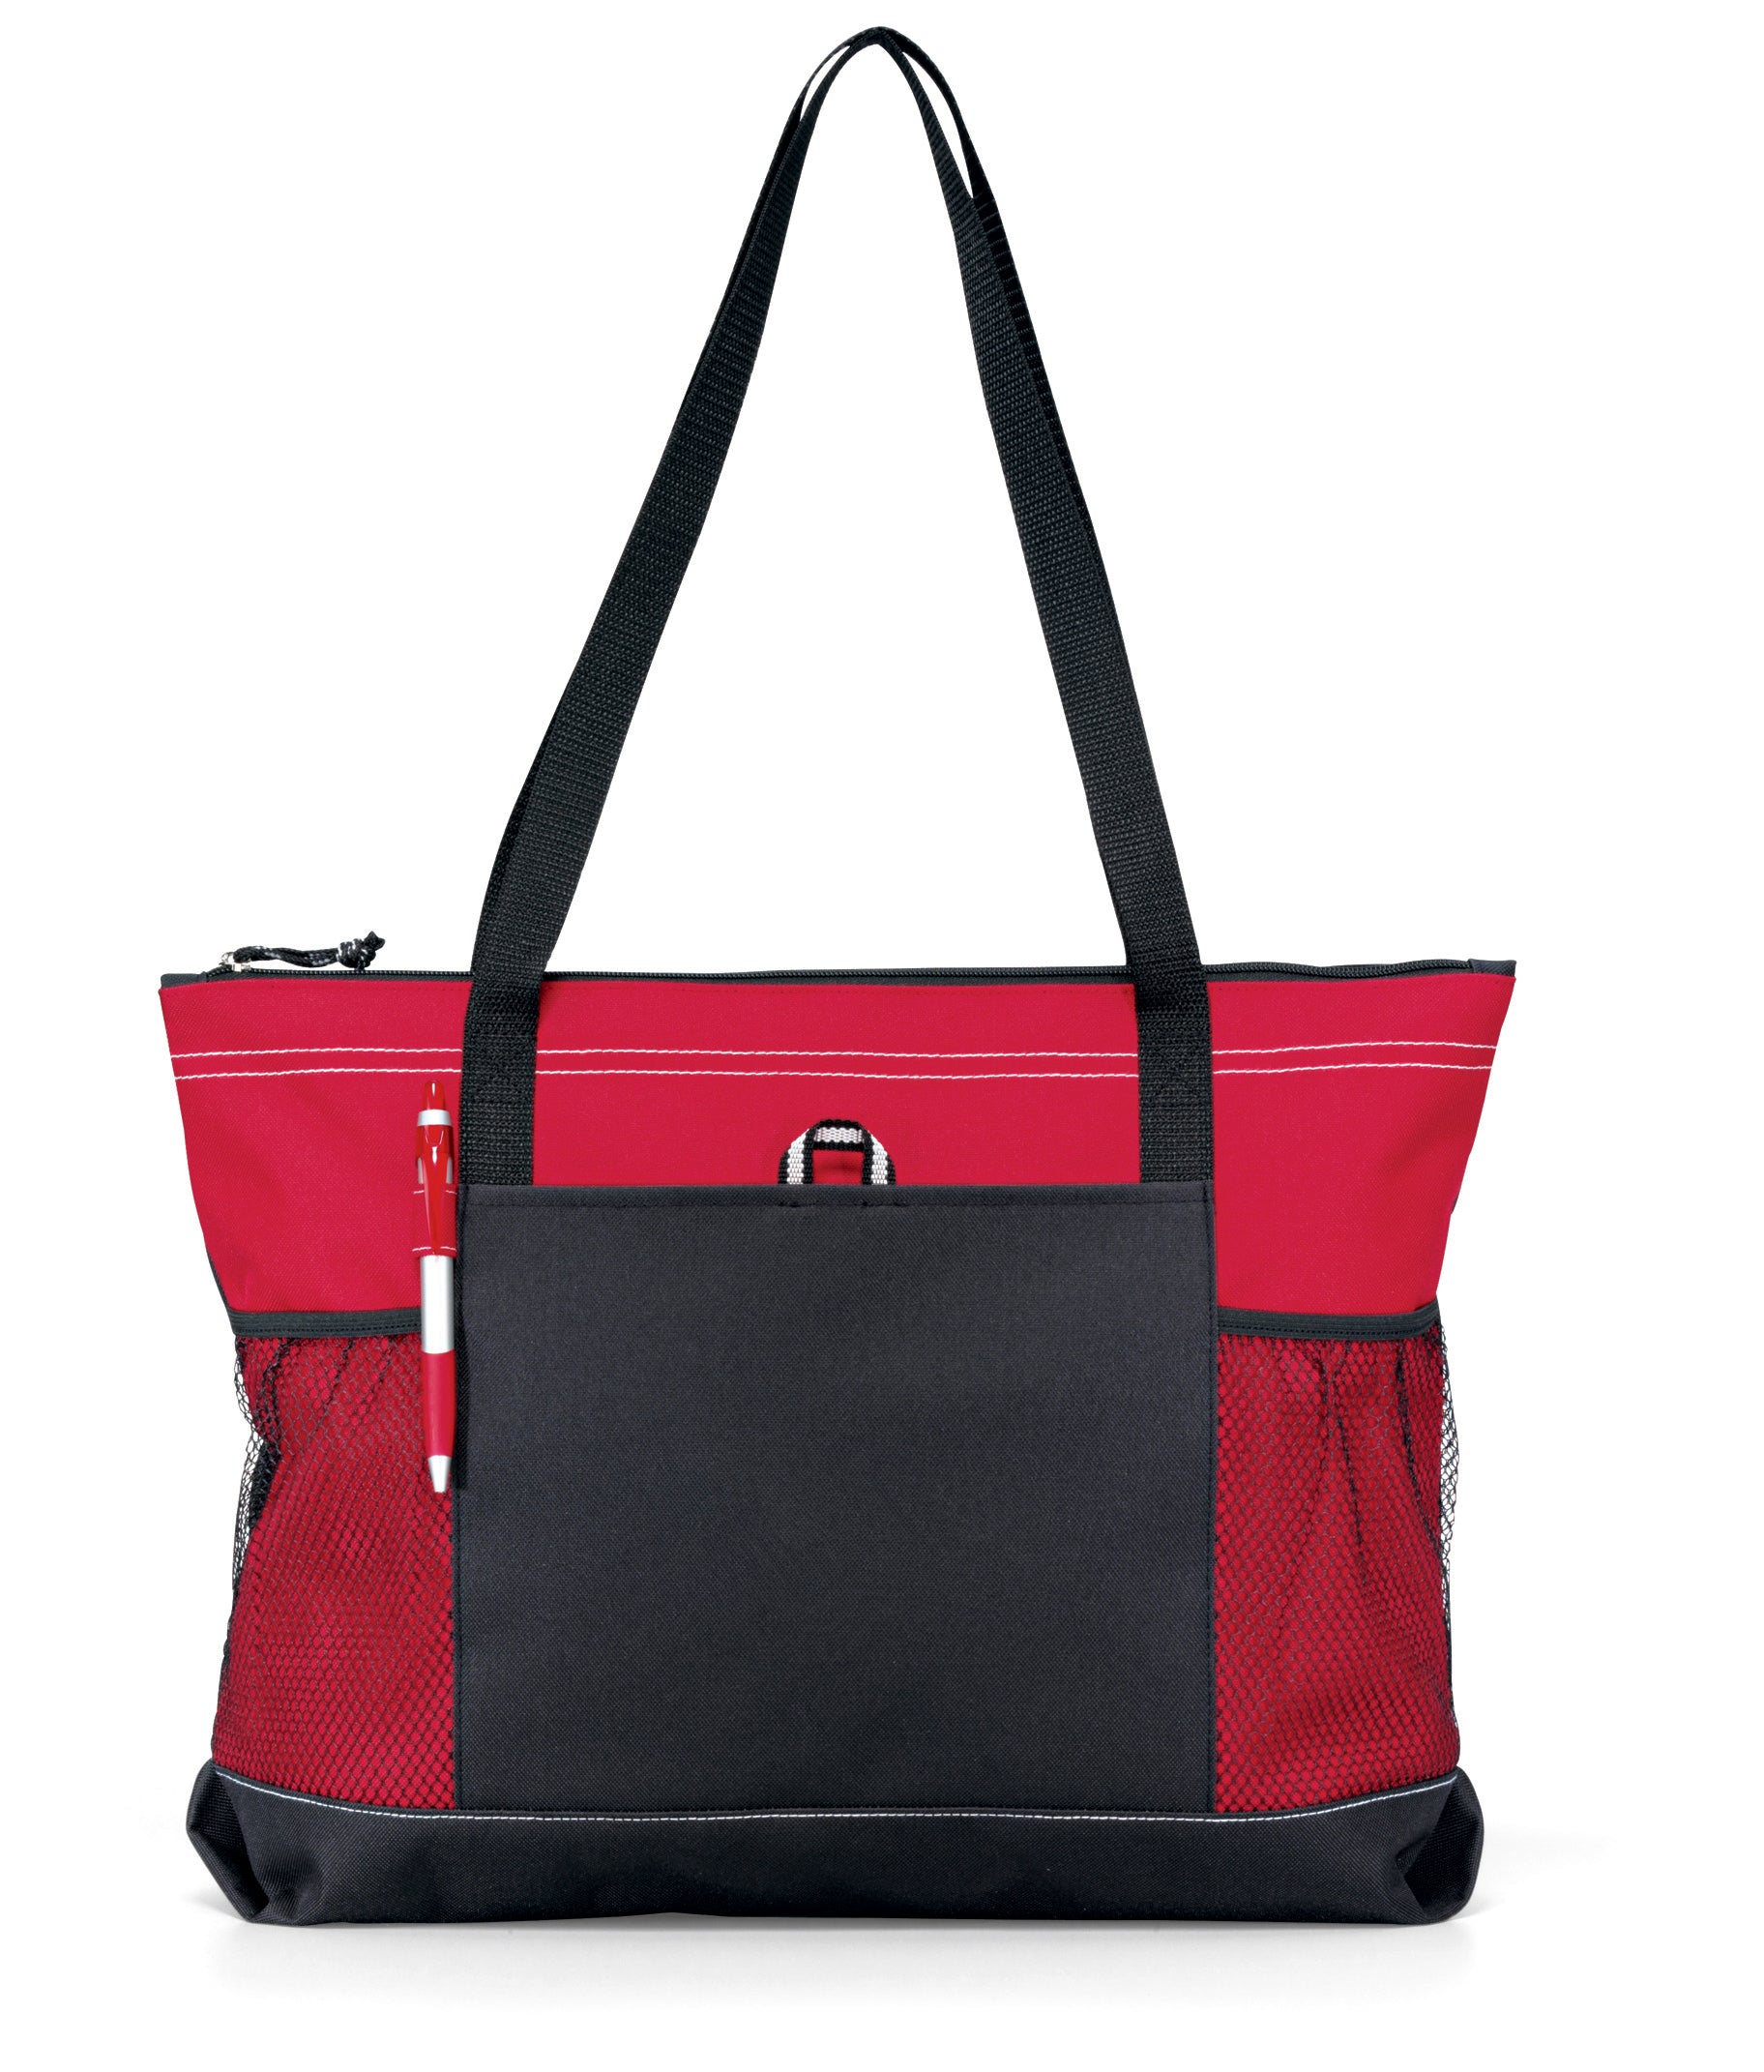 Select Zippered Tote